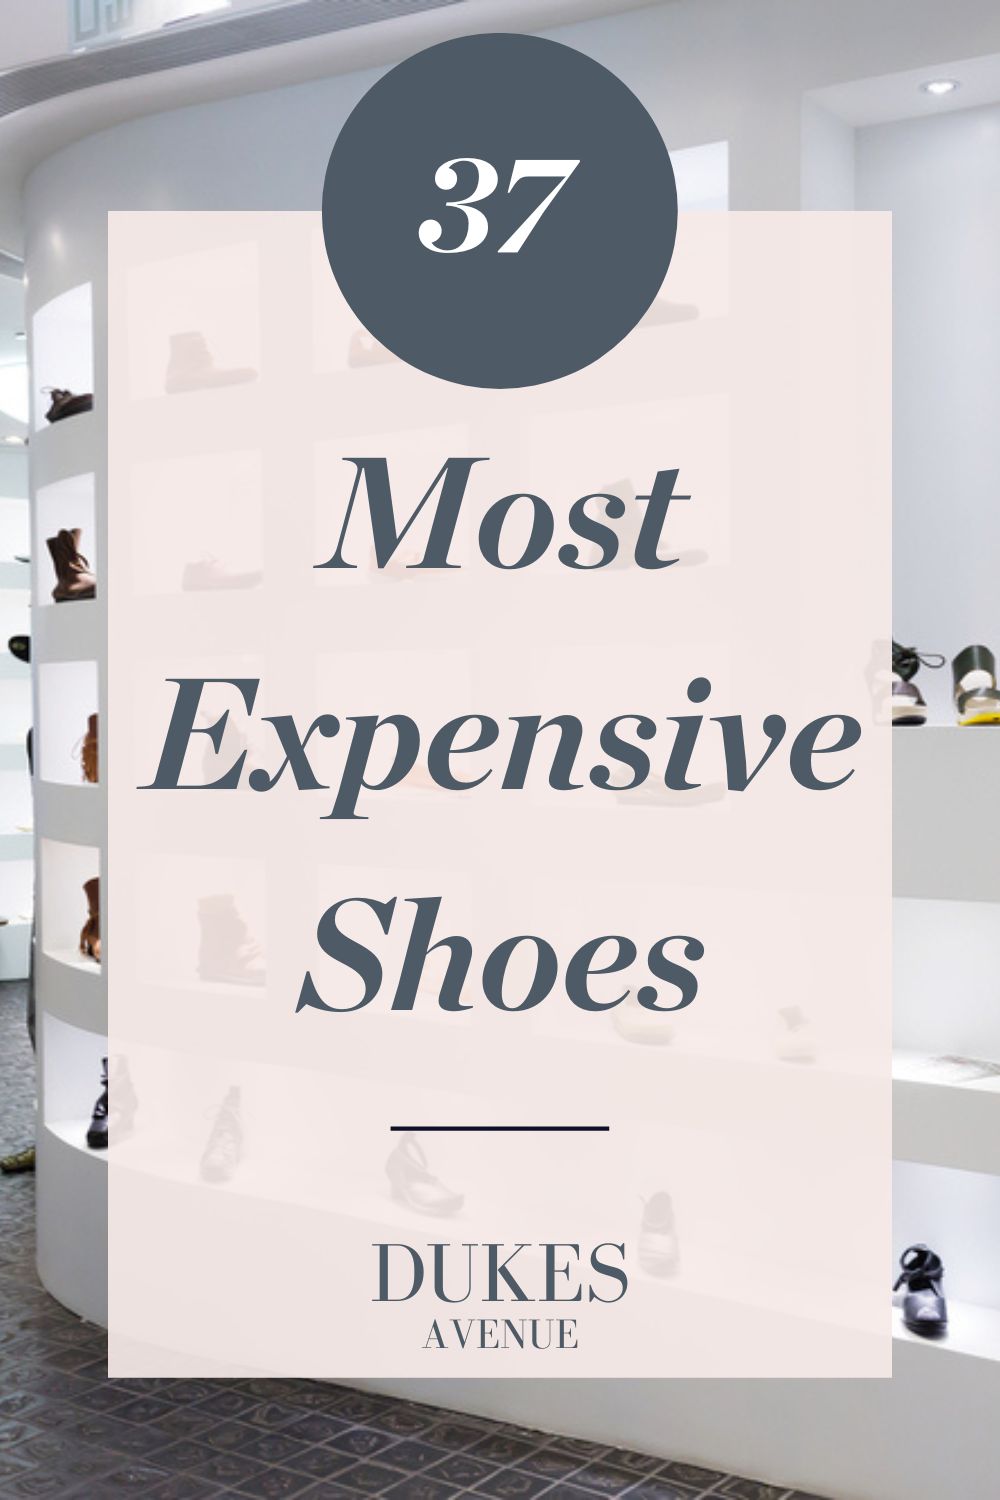 Image of expensive shoe shop with text overlay '37 Most Expensive Shoes'